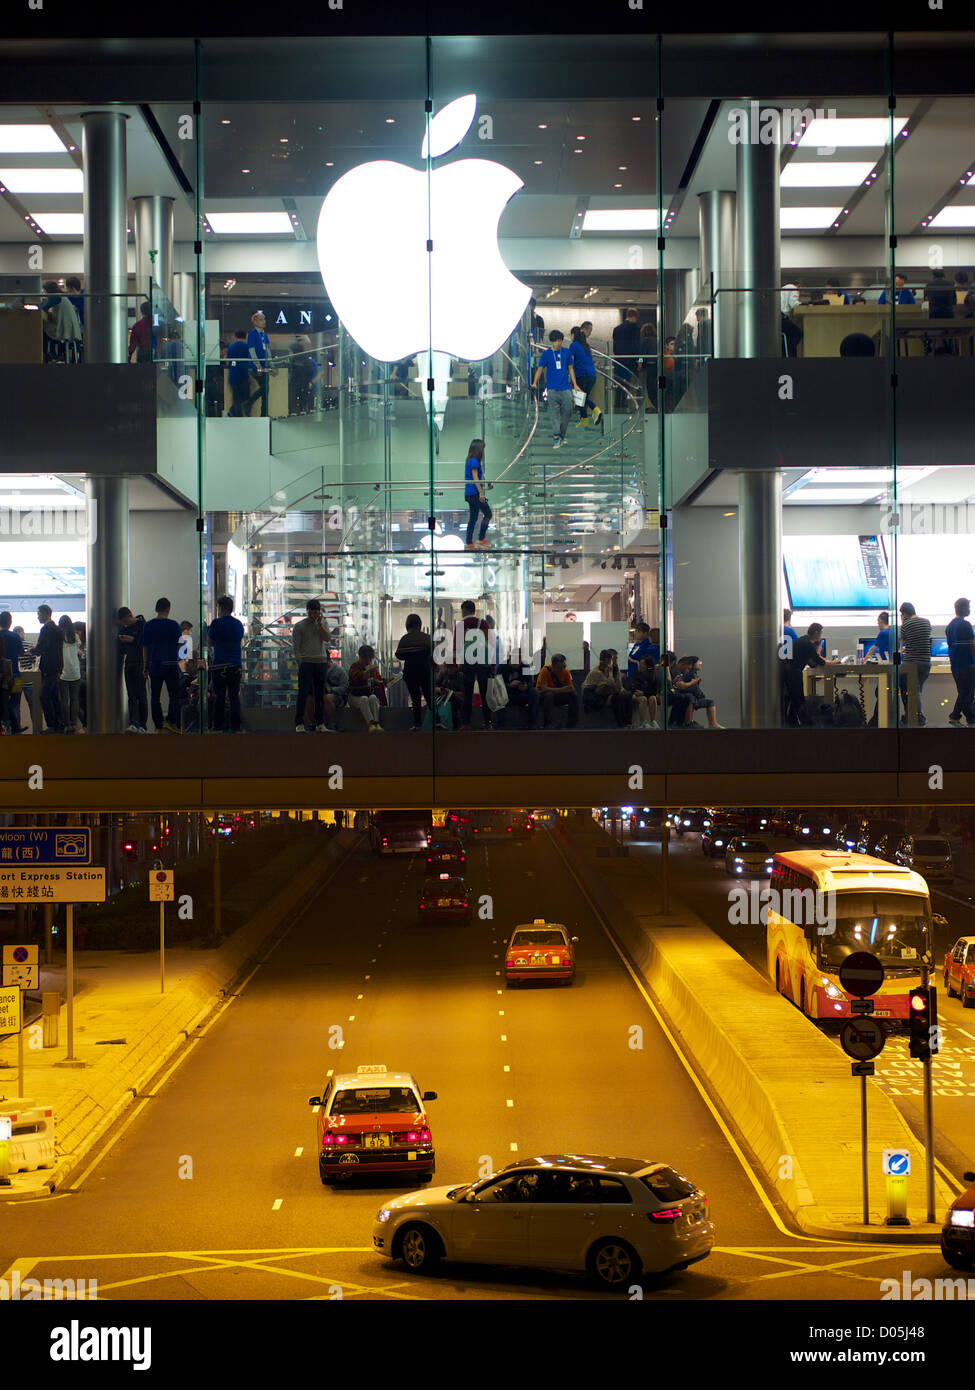 Der Apple Store in der ifc Shopping Mall in Central, Hong Kong Stockfoto